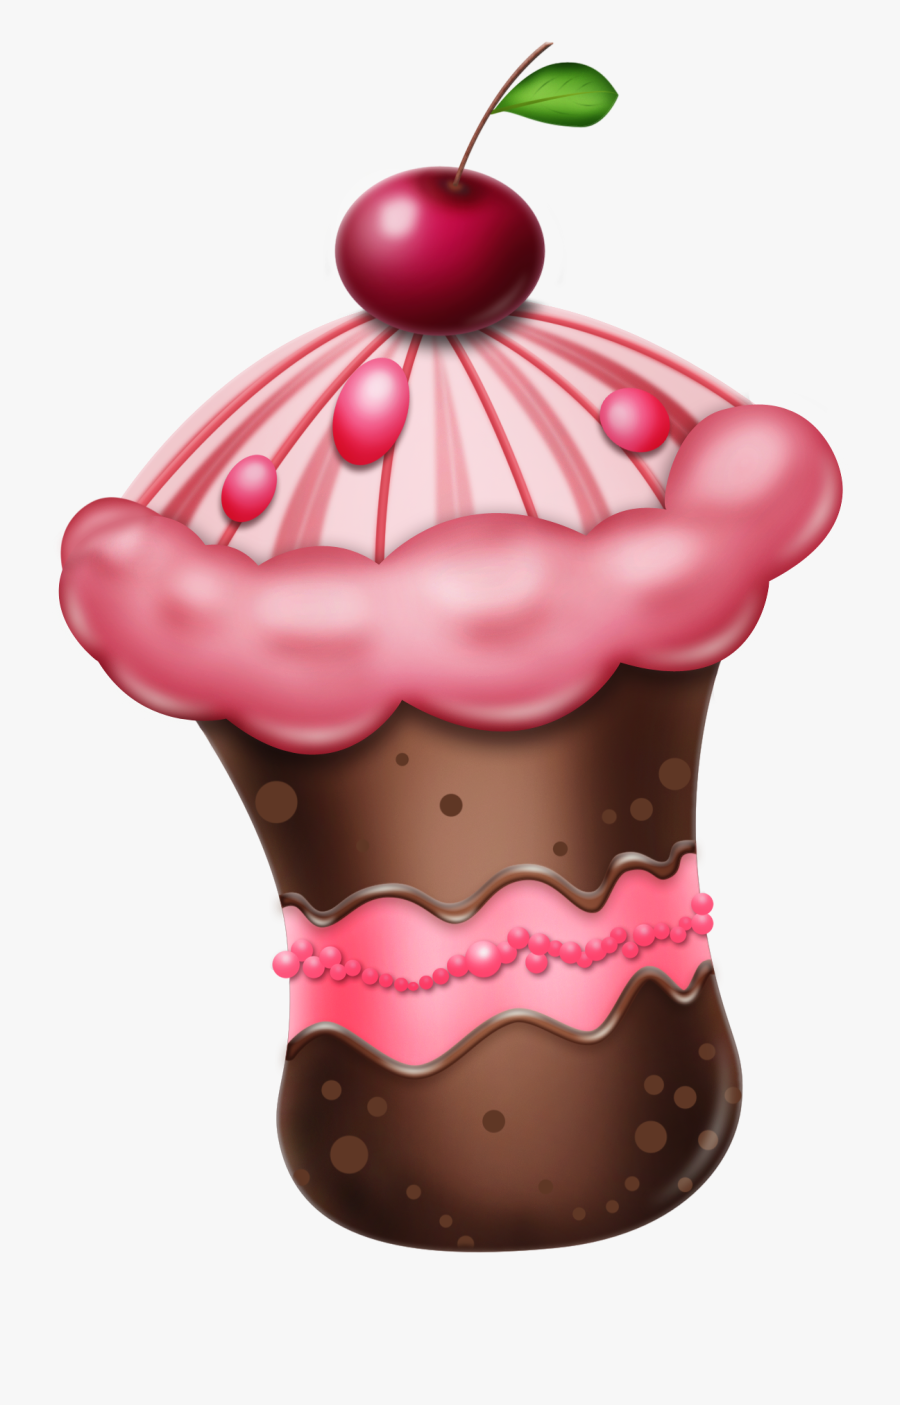 Chocolate With Cherry Png - Small Cake Png, Transparent Clipart